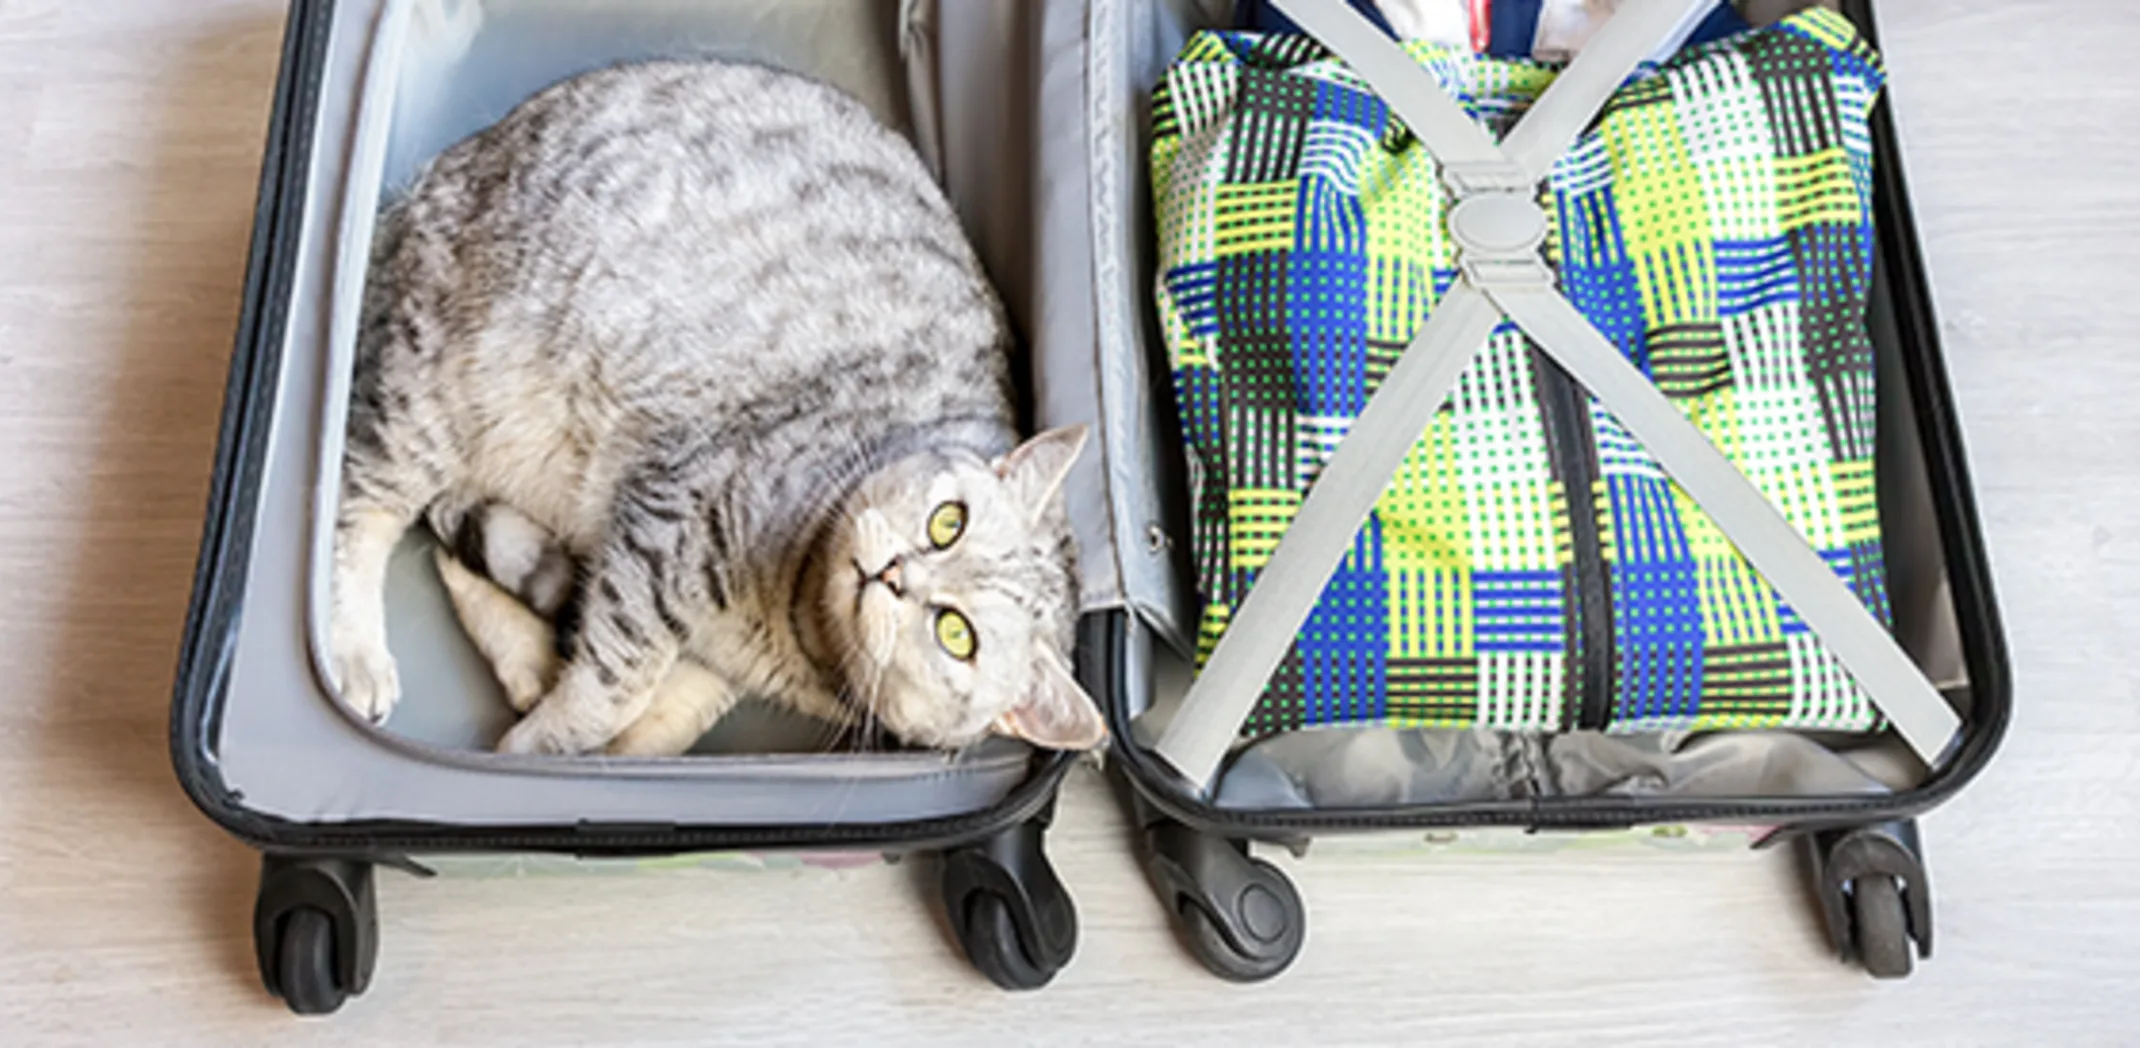 Cat in suitcase ready to travel